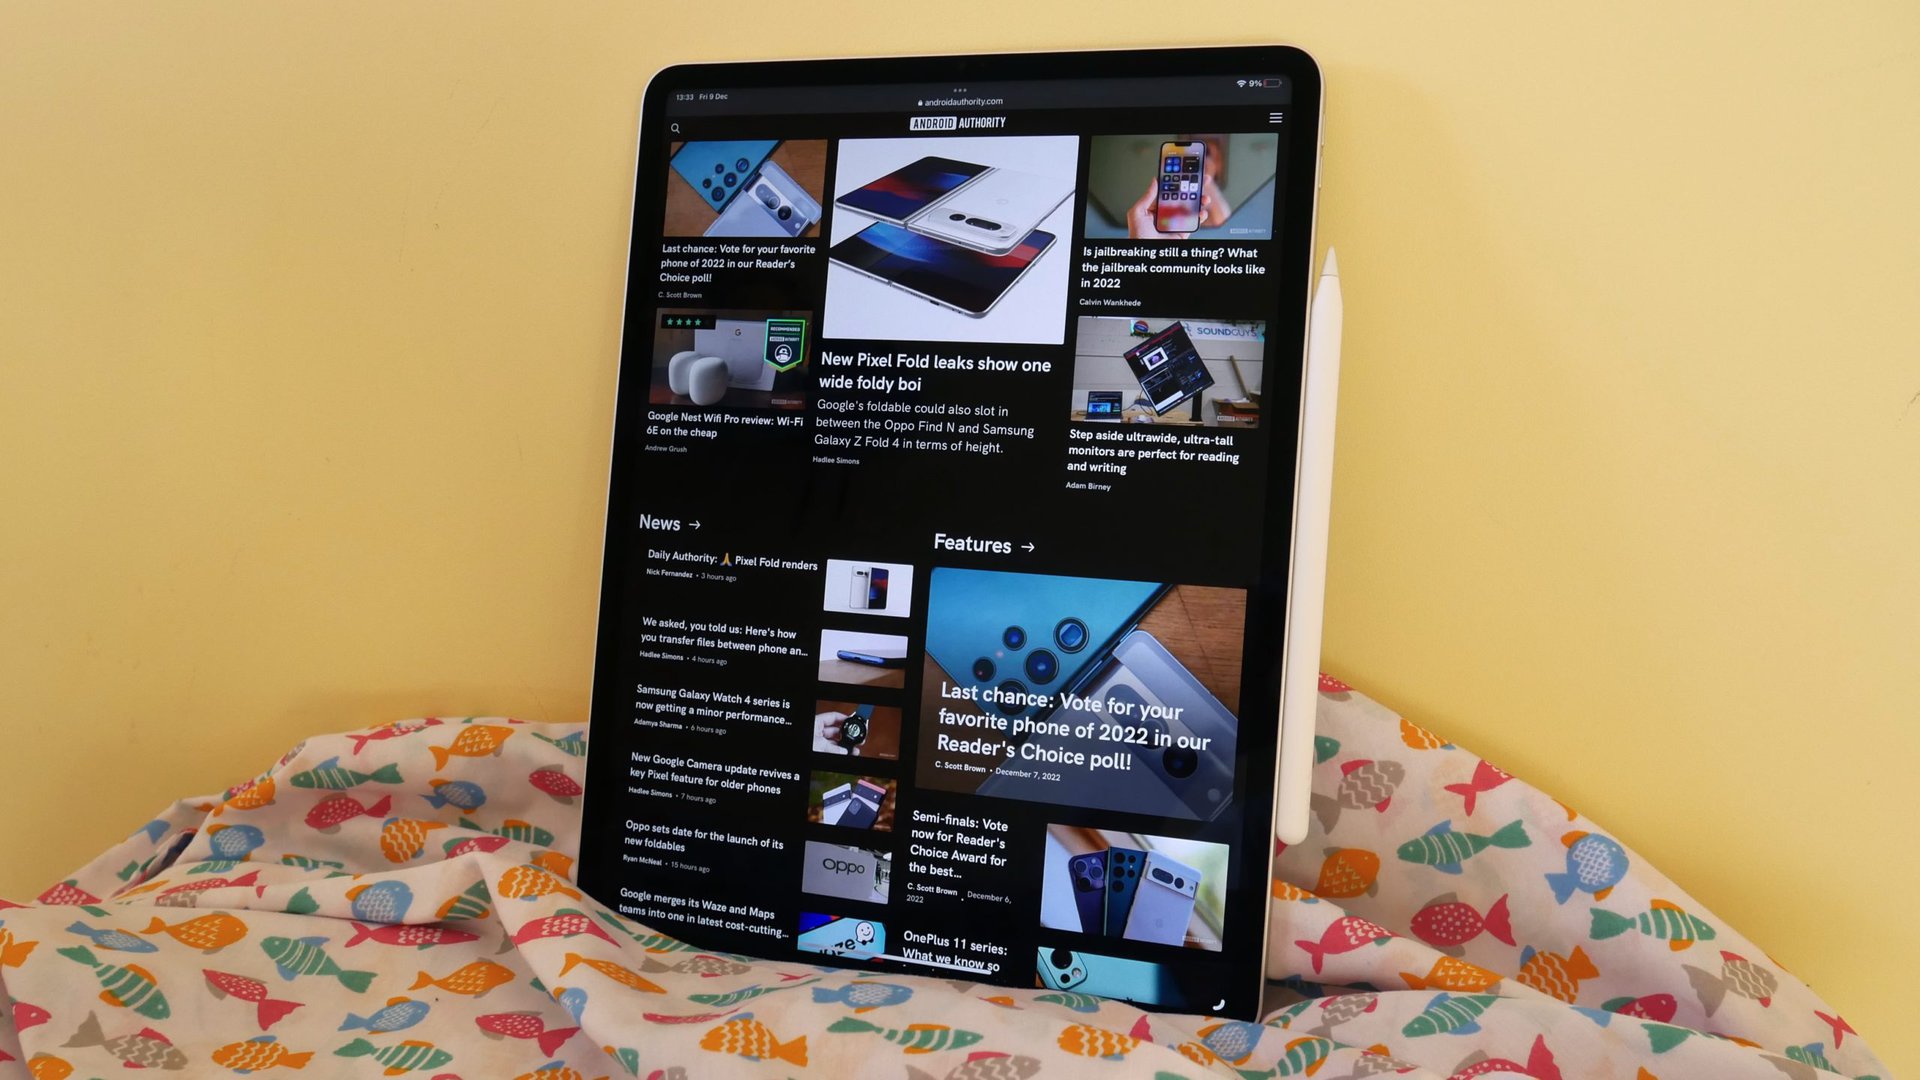 Where is the cheapest place to buy an iPad Pro?